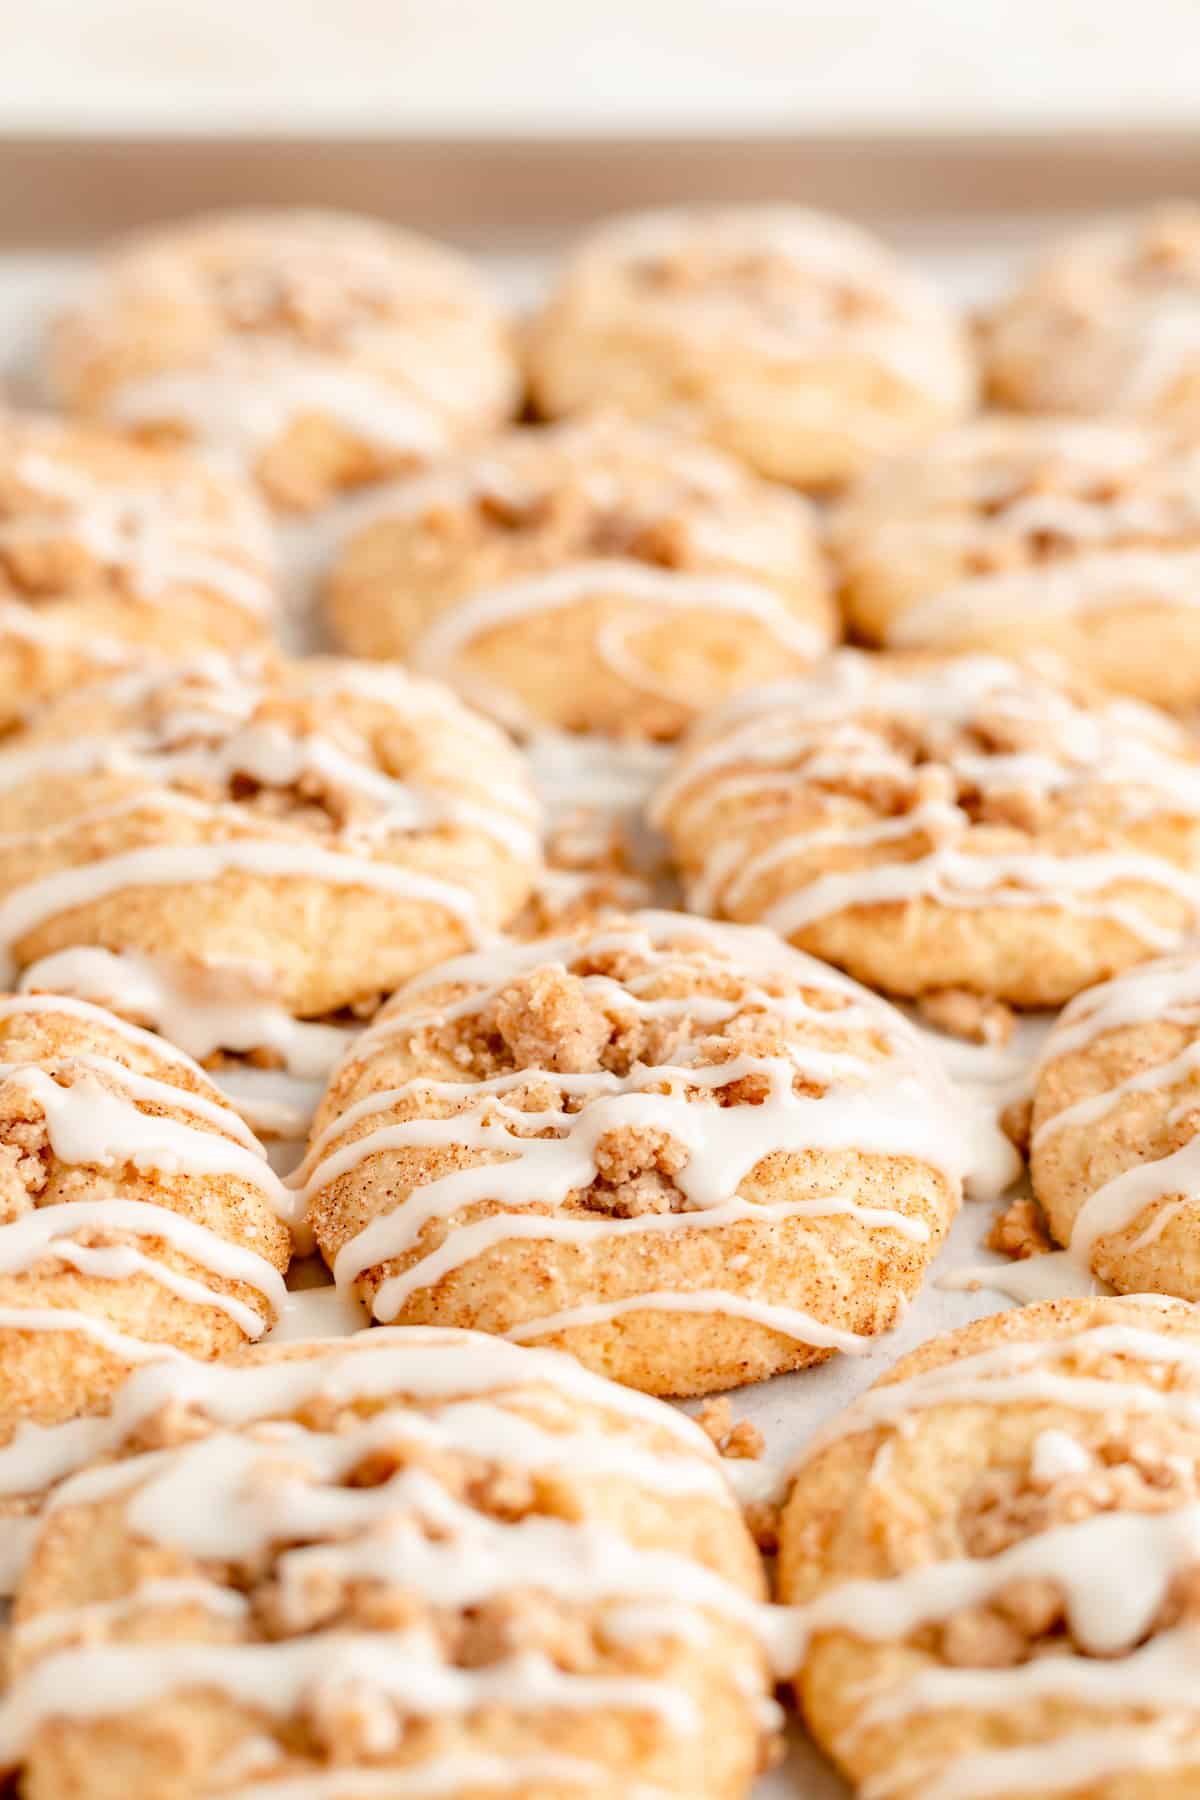 45 degree angle close up of icing drizzled coffee cake cookies on baking tray.